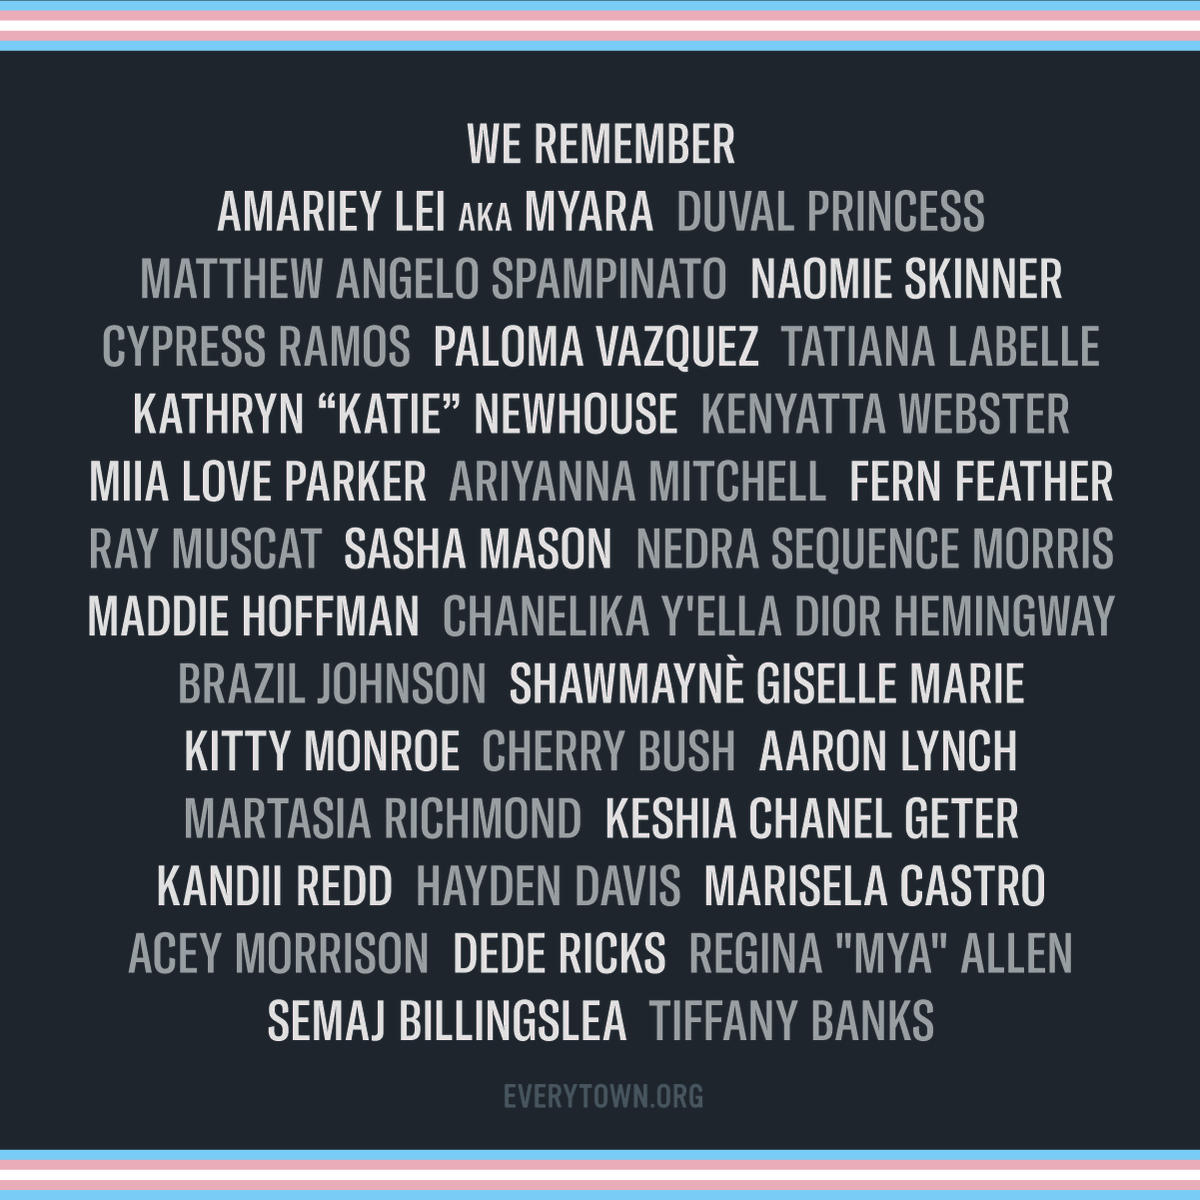 Say their names: The 32 people who were killed in anti-trans violence this year.